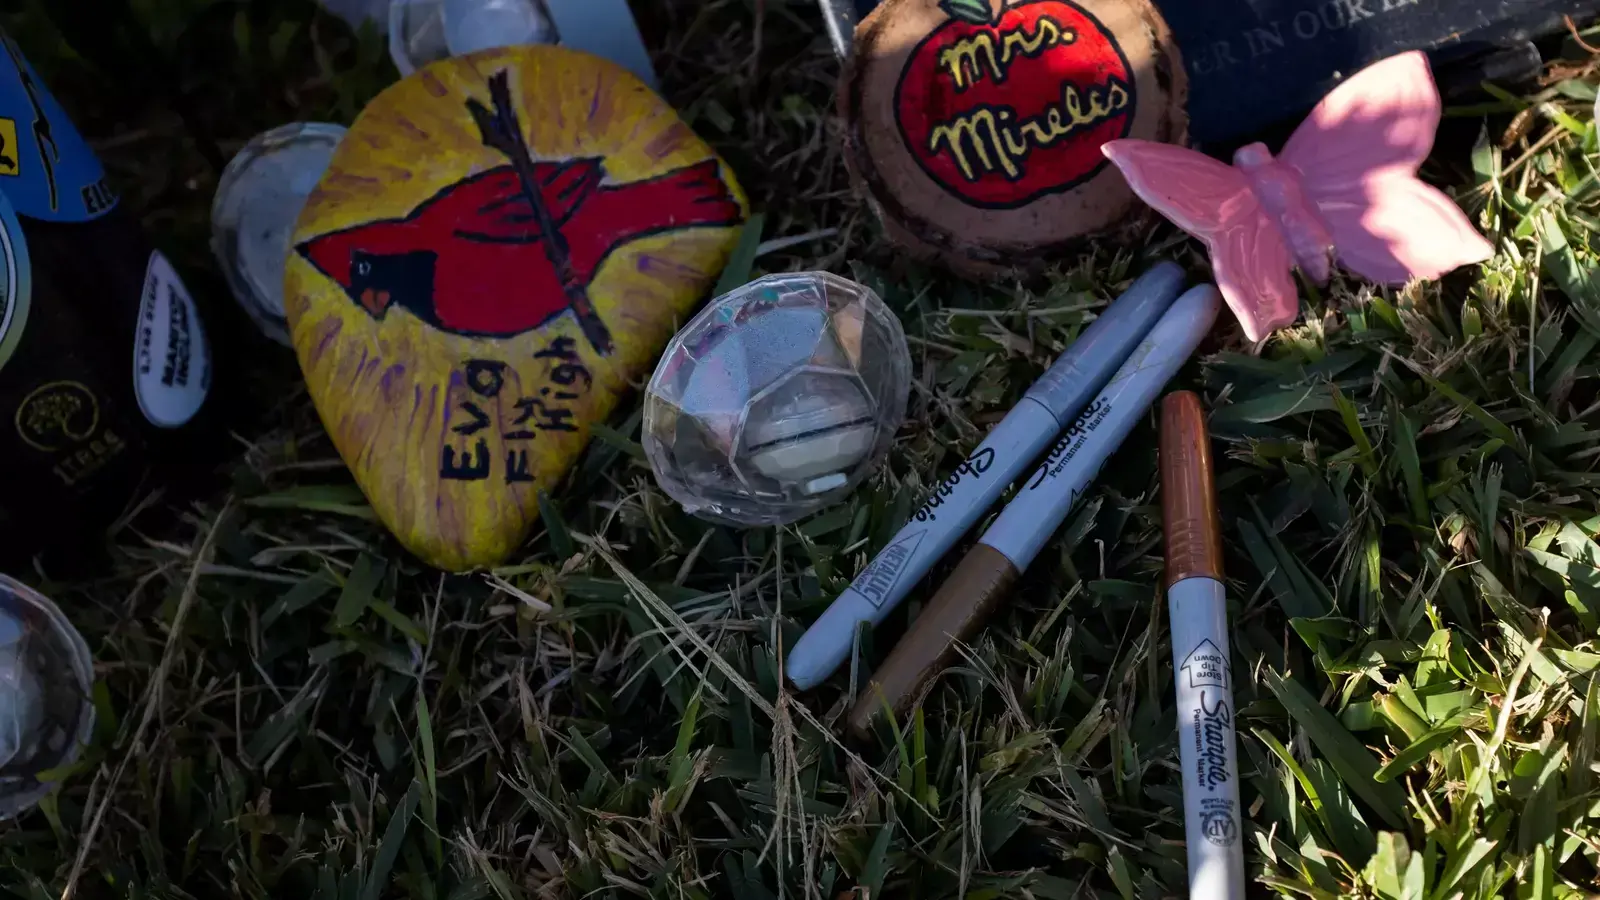 Sharpie markers are seen on the grave of Eva Mireles, one of the victims of the Robb Elementary mass shooting that resulted in the death of 19 children and two teachers in the U.S. school shooting, in Uvalde, Texas, United States, November 30, 2022.